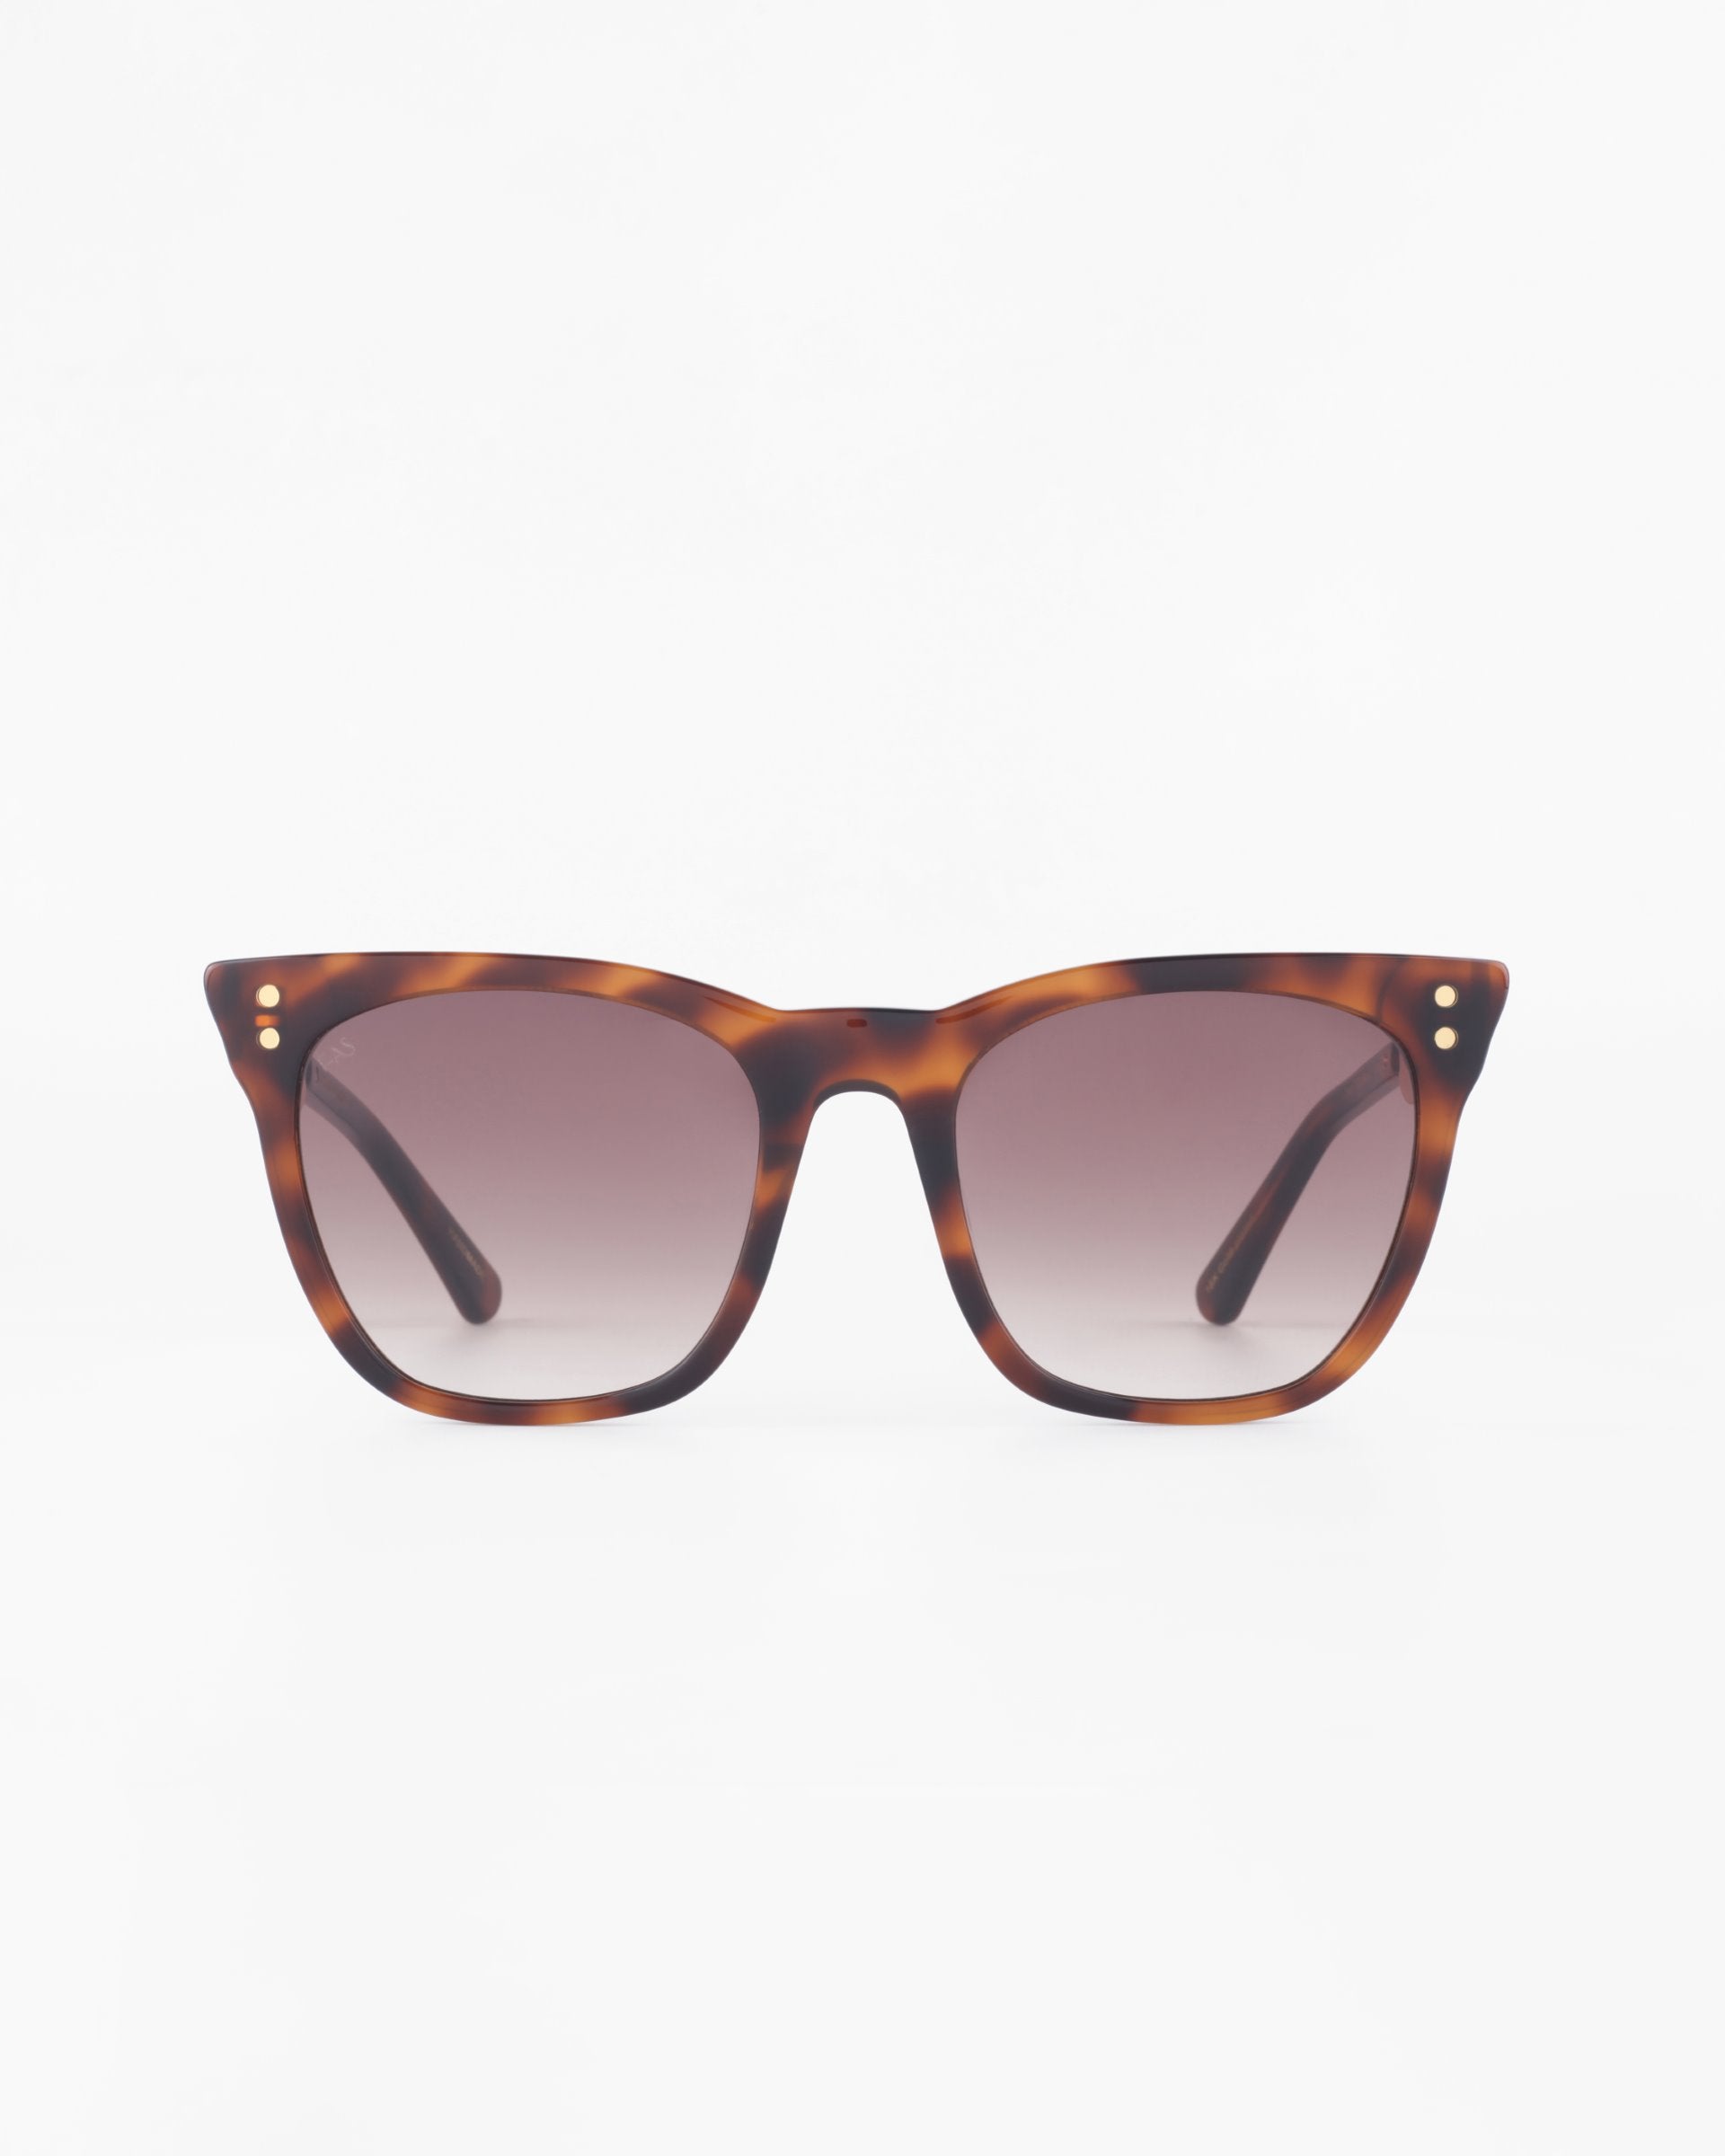 Front view of a pair of tortoiseshell Deco sunglasses by For Art&#39;s Sake® with a classic square frame design. Crafted from premium acetate, the sunglasses feature gradient lenses and small metallic dots near the hinges on both sides of the frame. The background is plain white.